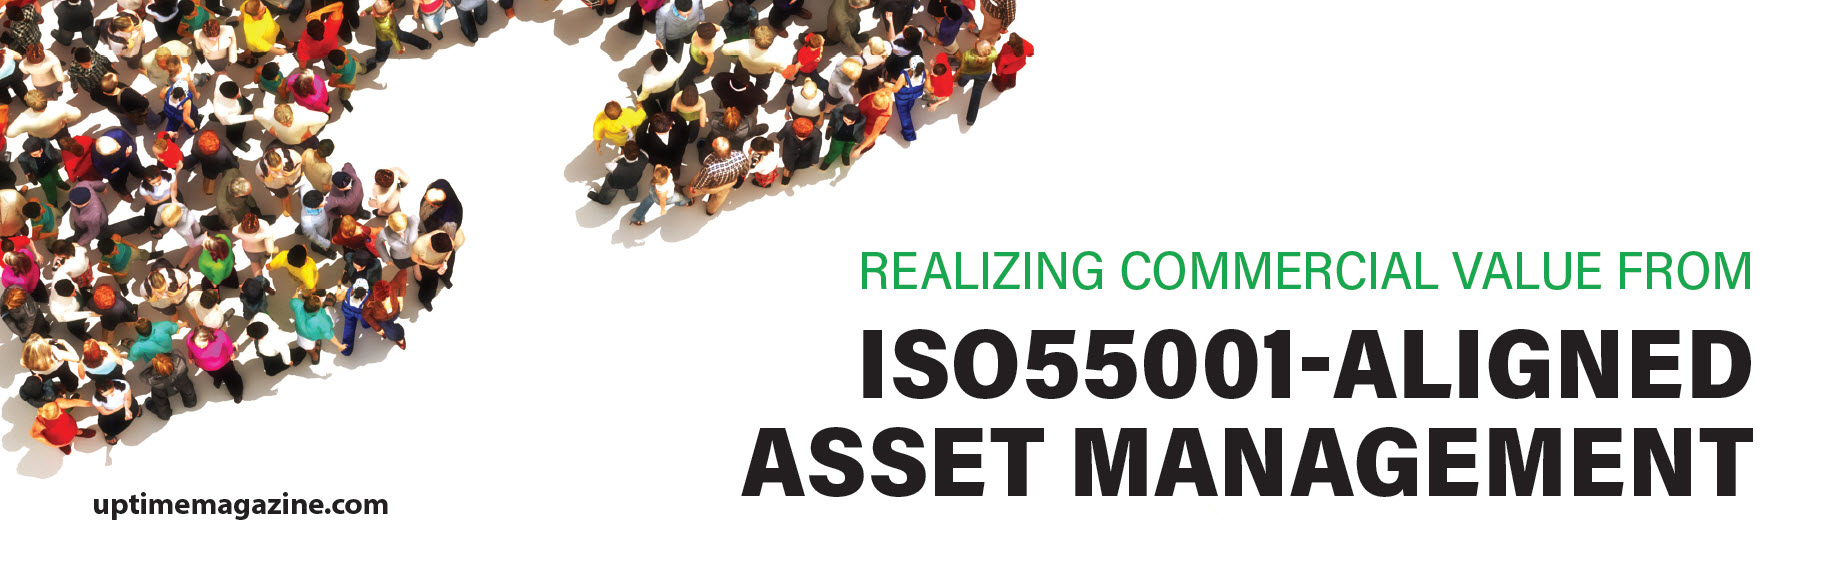 Realizing Commercial Value From ISO55001 Aligned Asset Management